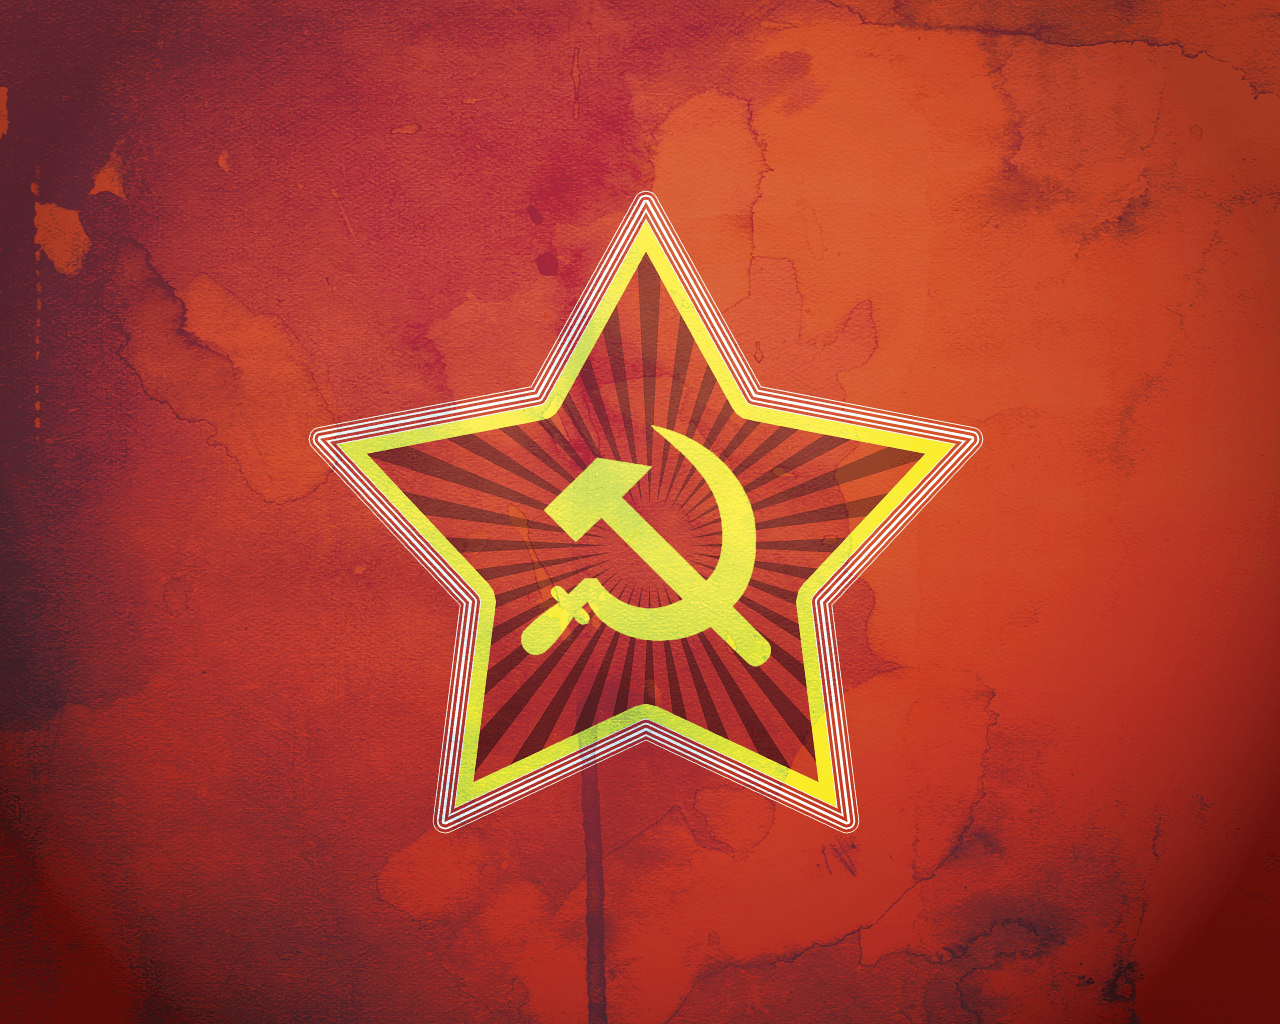 soviet- an elected local, district, or national council in